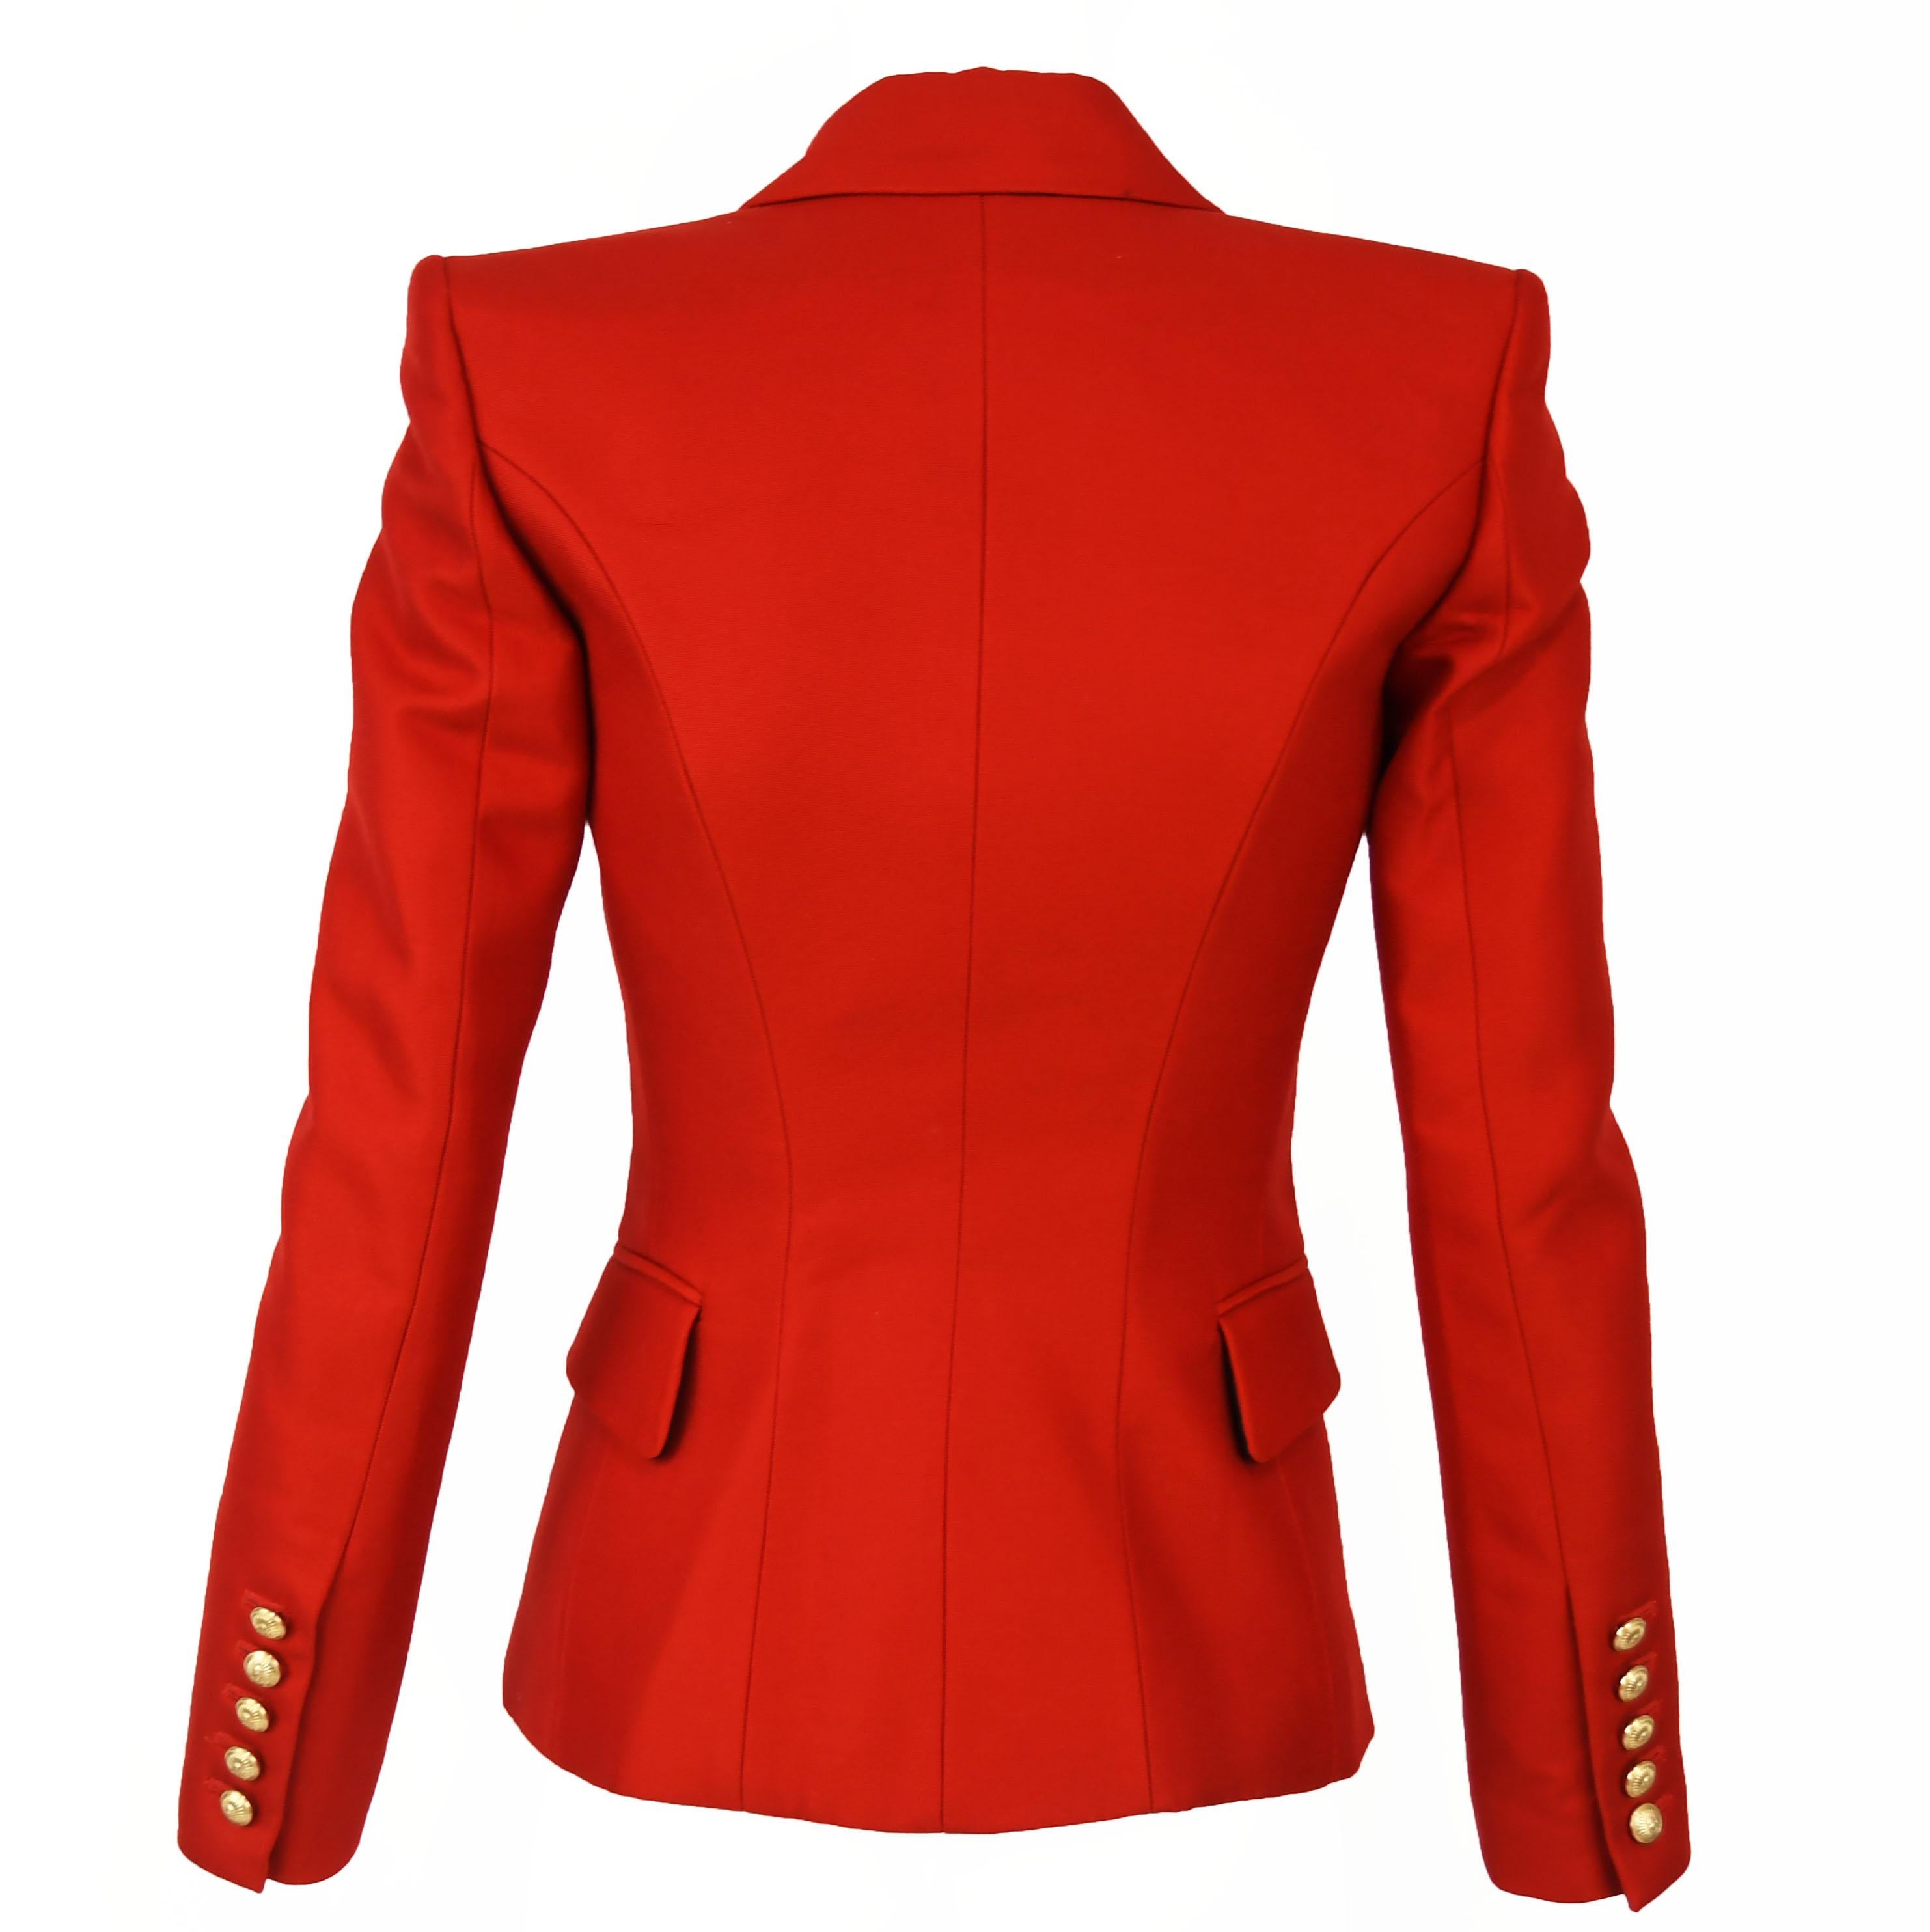 Balmain Red Double Breasted Blazer - Size FR 34 & 36 In New Condition For Sale In Newport, RI